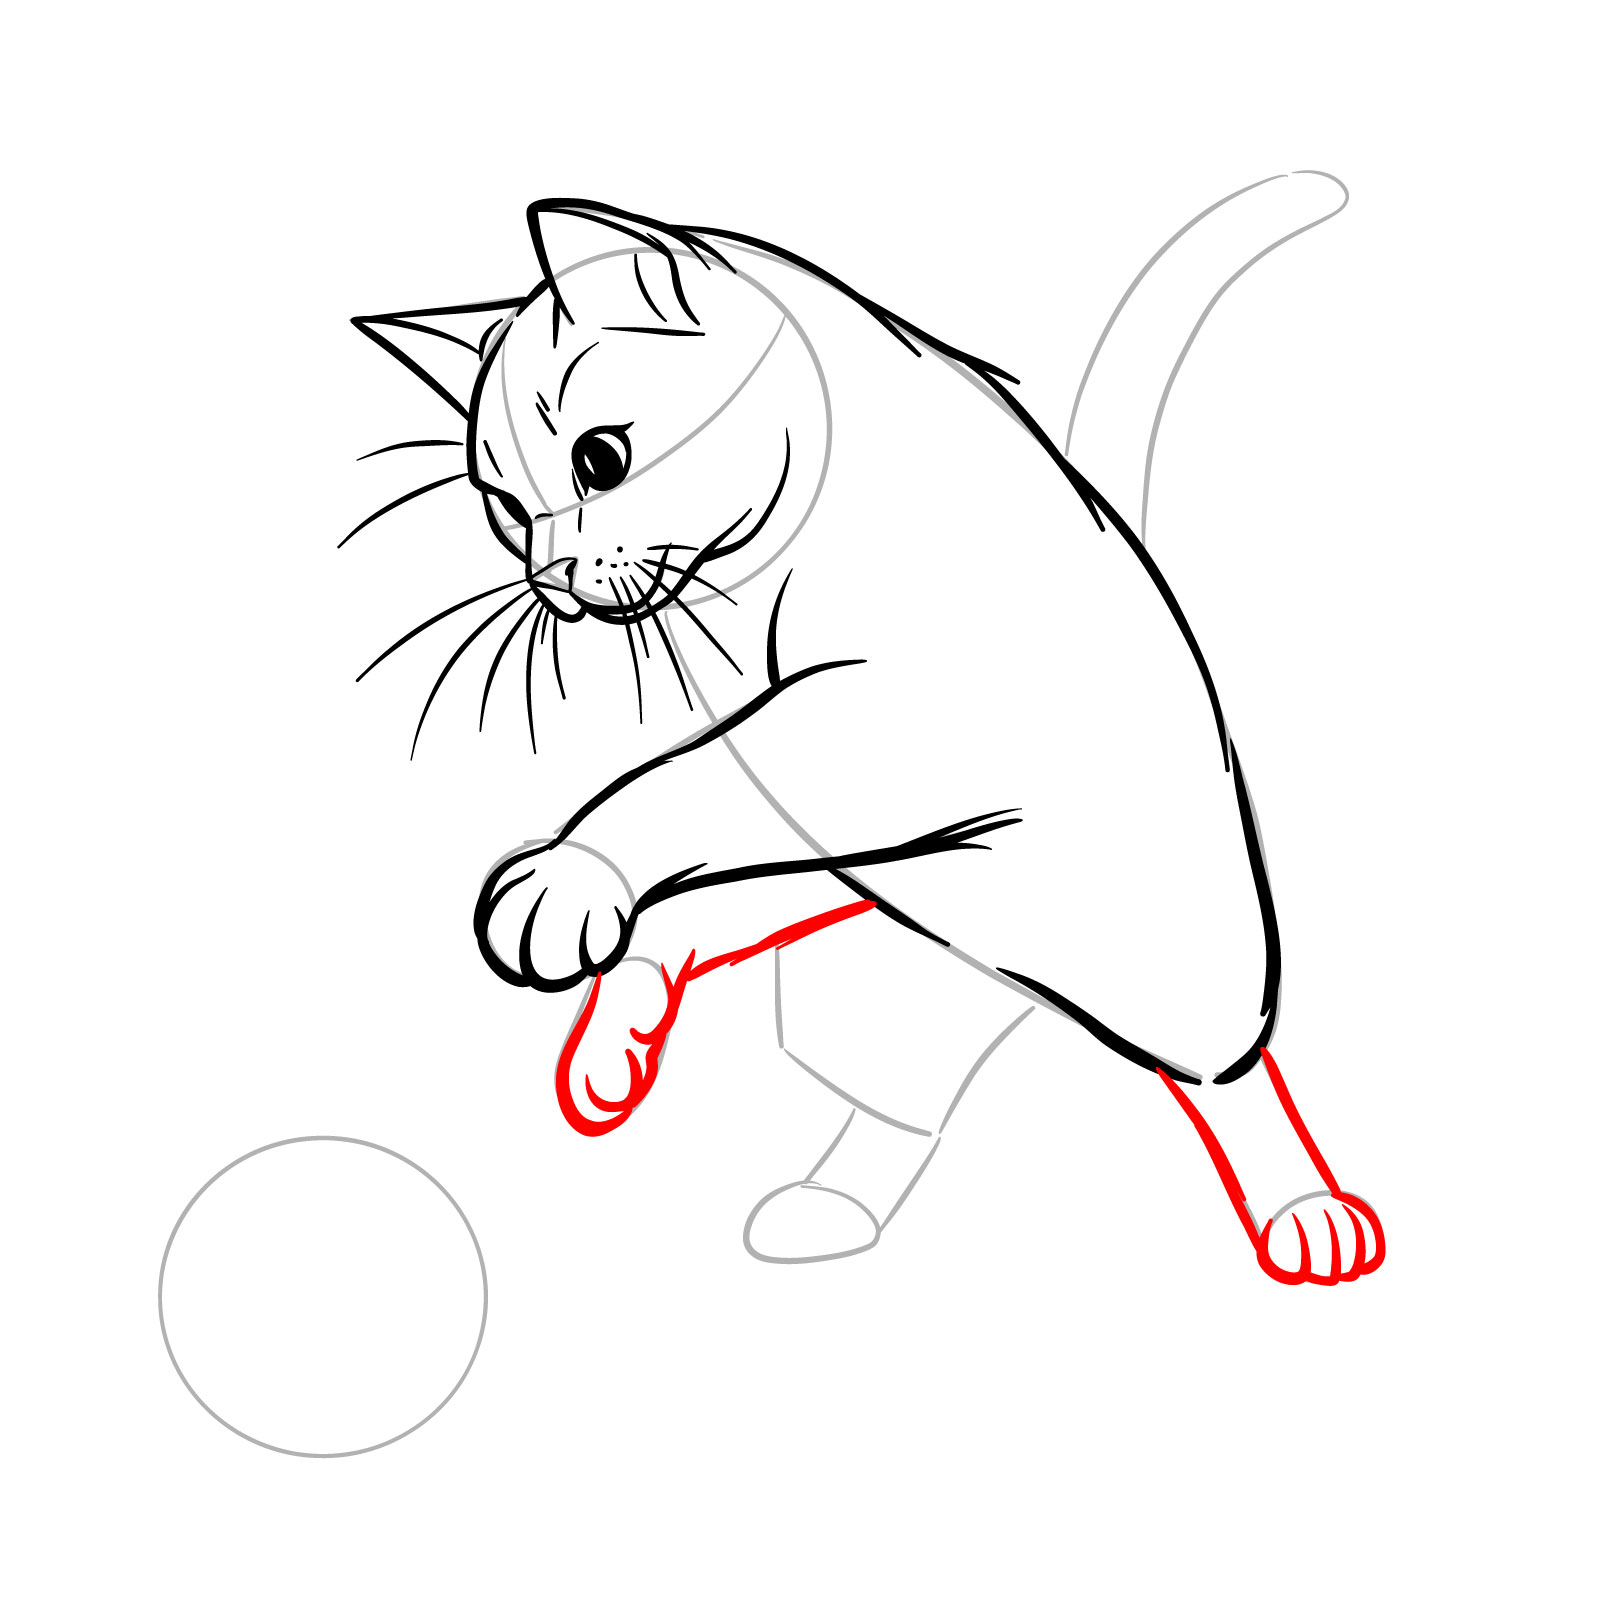 Illustration of a cat playing, finishing the rear leg and adding the second front leg - step 10